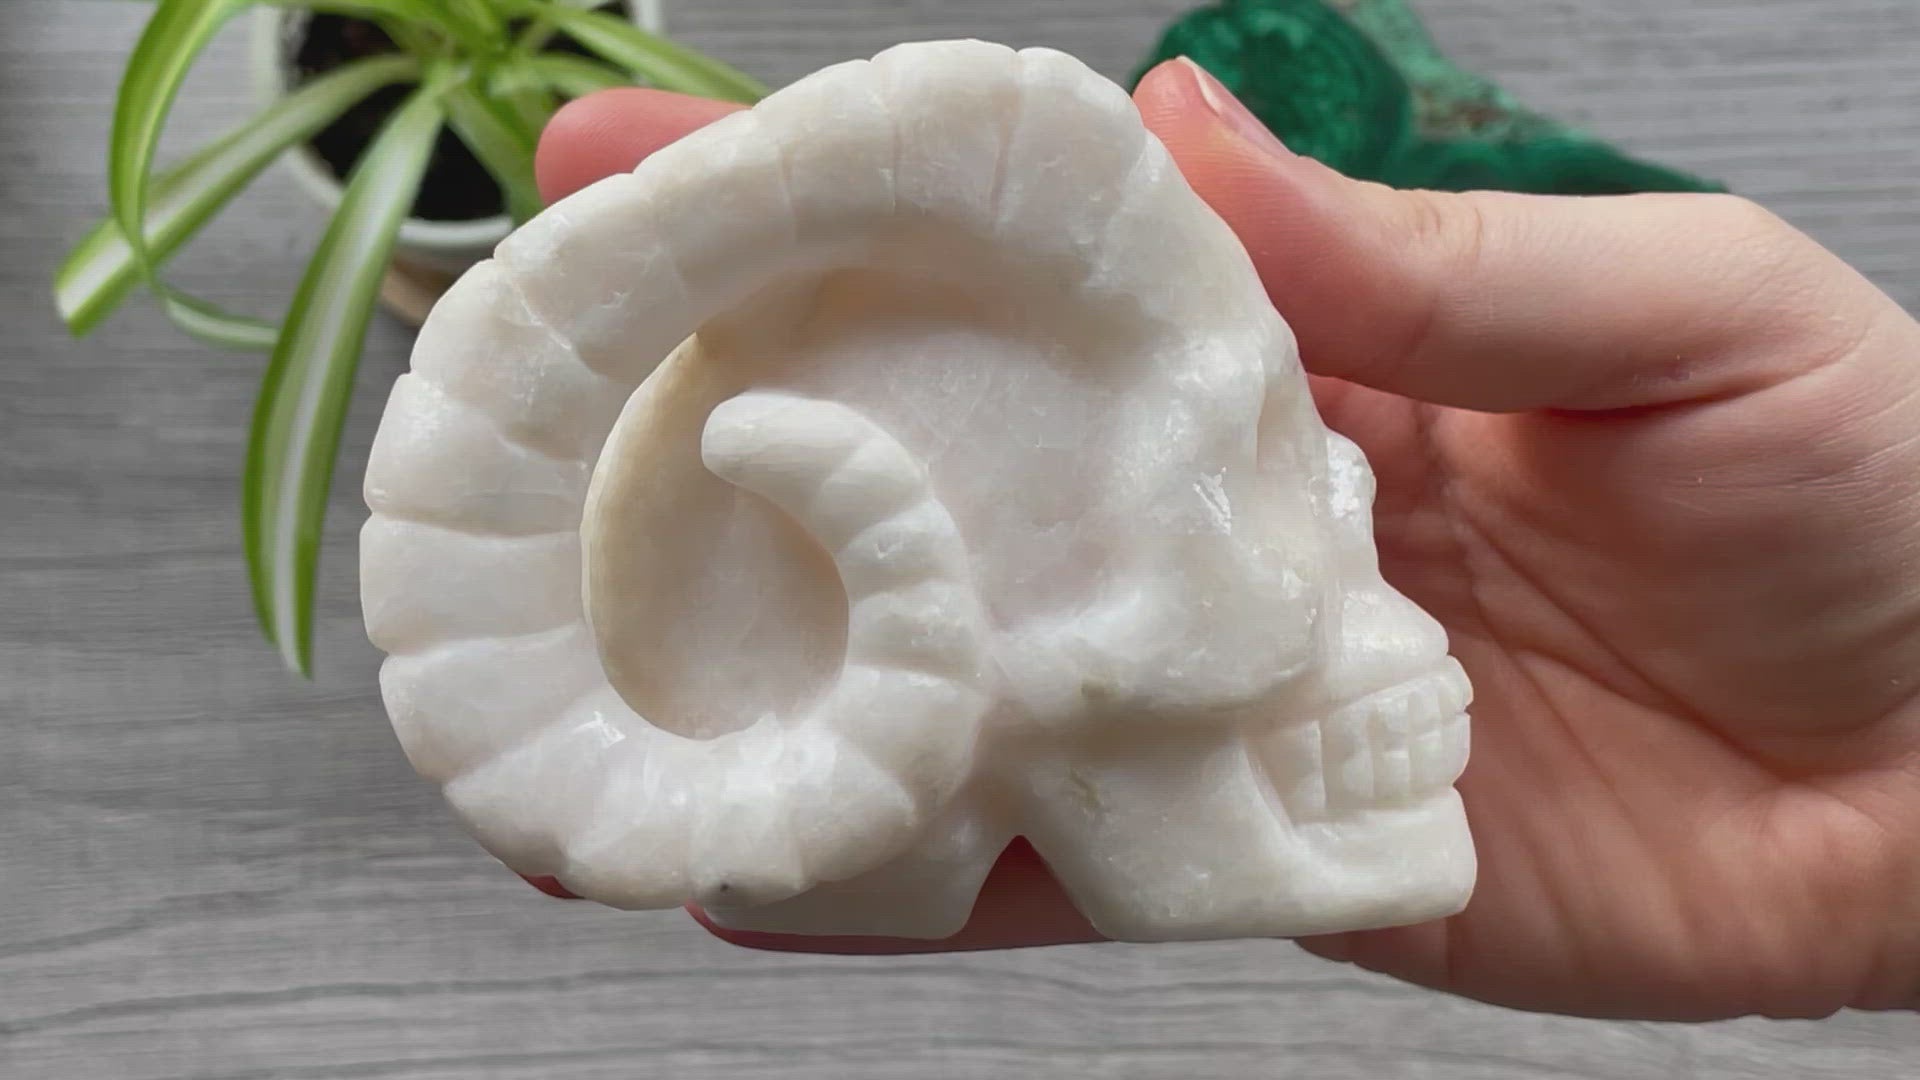 Pictured is a demon skull with horns carved out of white calcite.